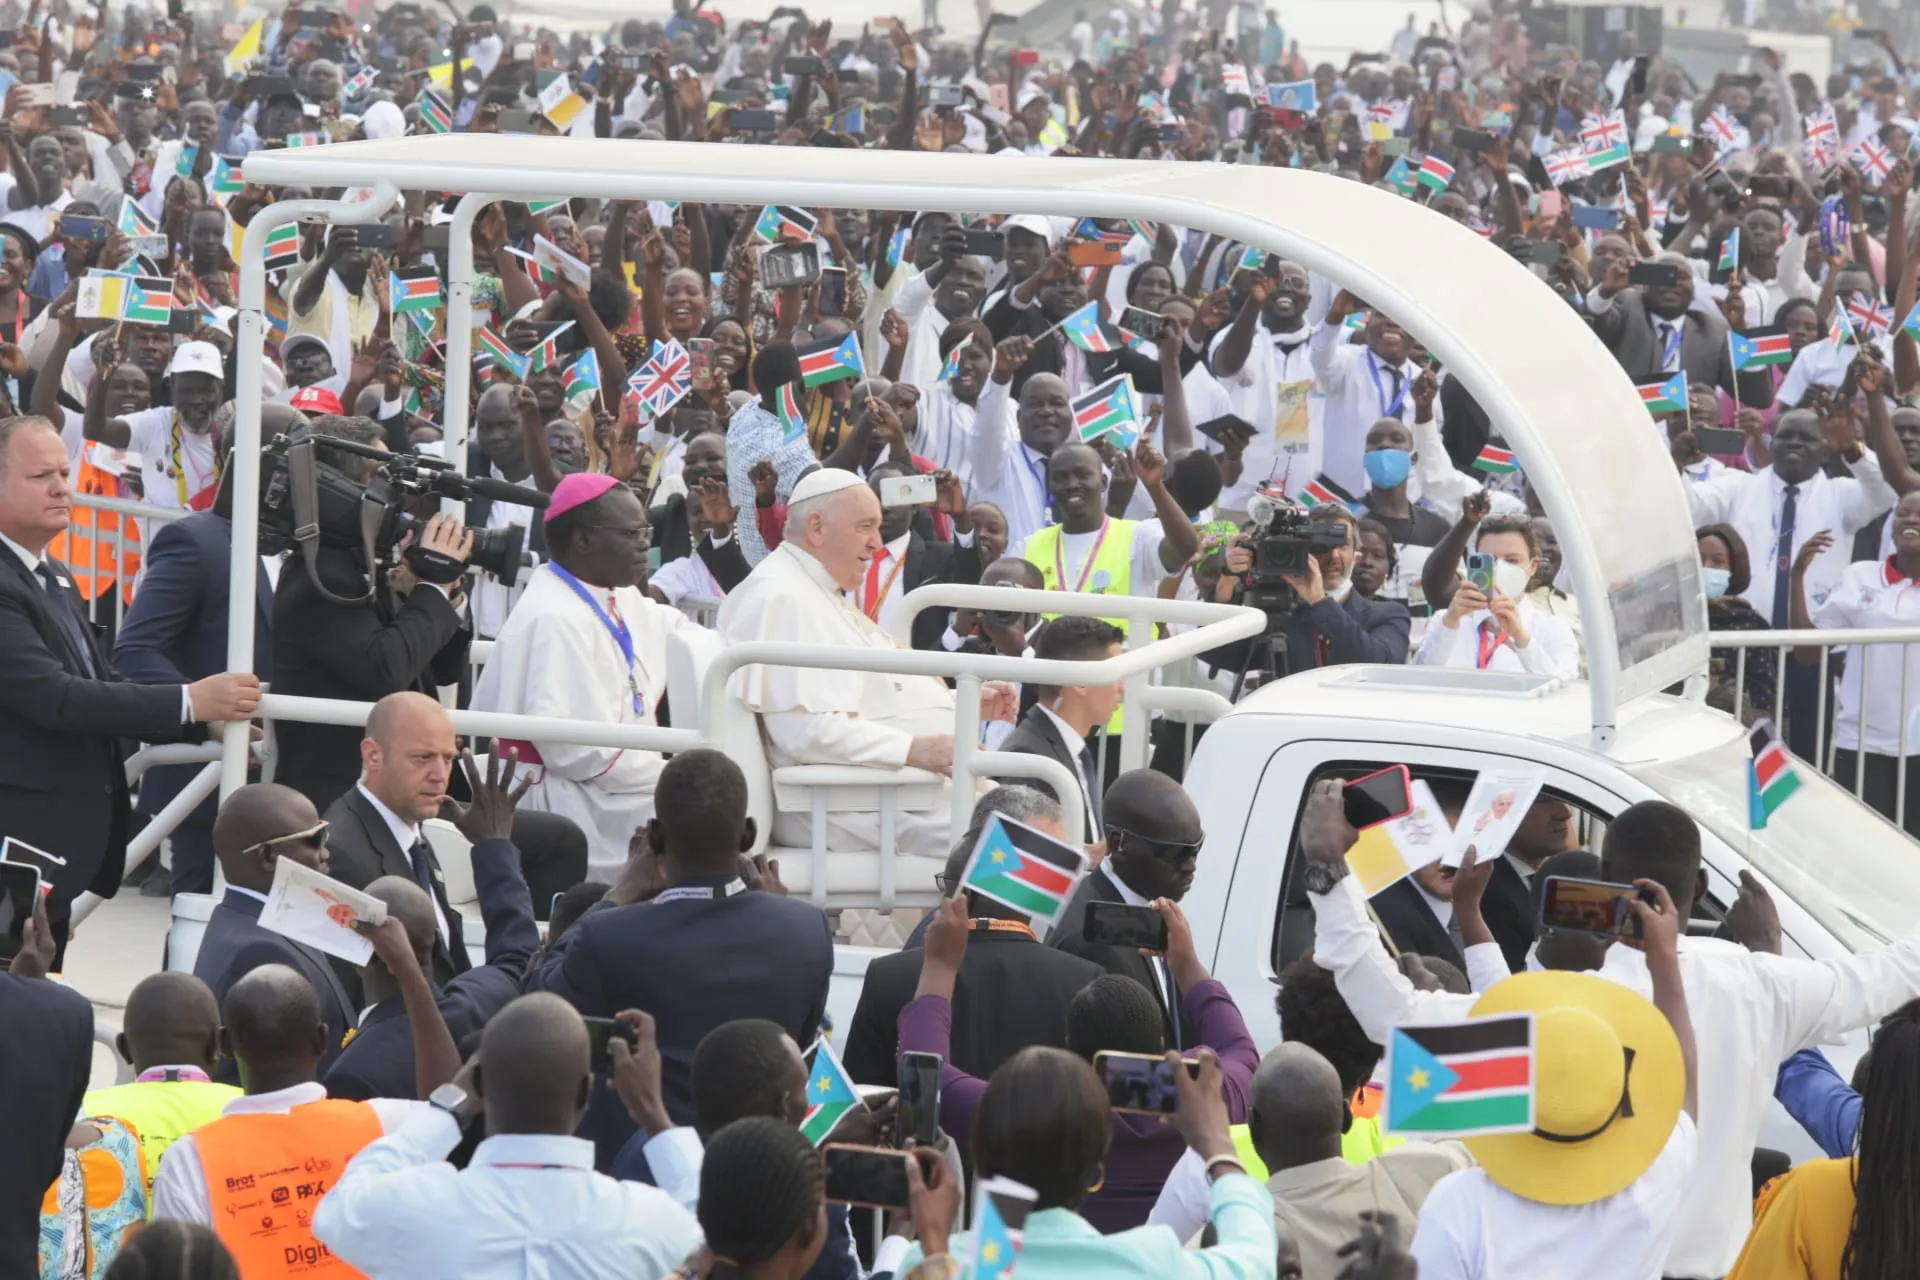 More than 100,000 people attended the papal Mass in Juba, according to local authorities.?w=200&h=150